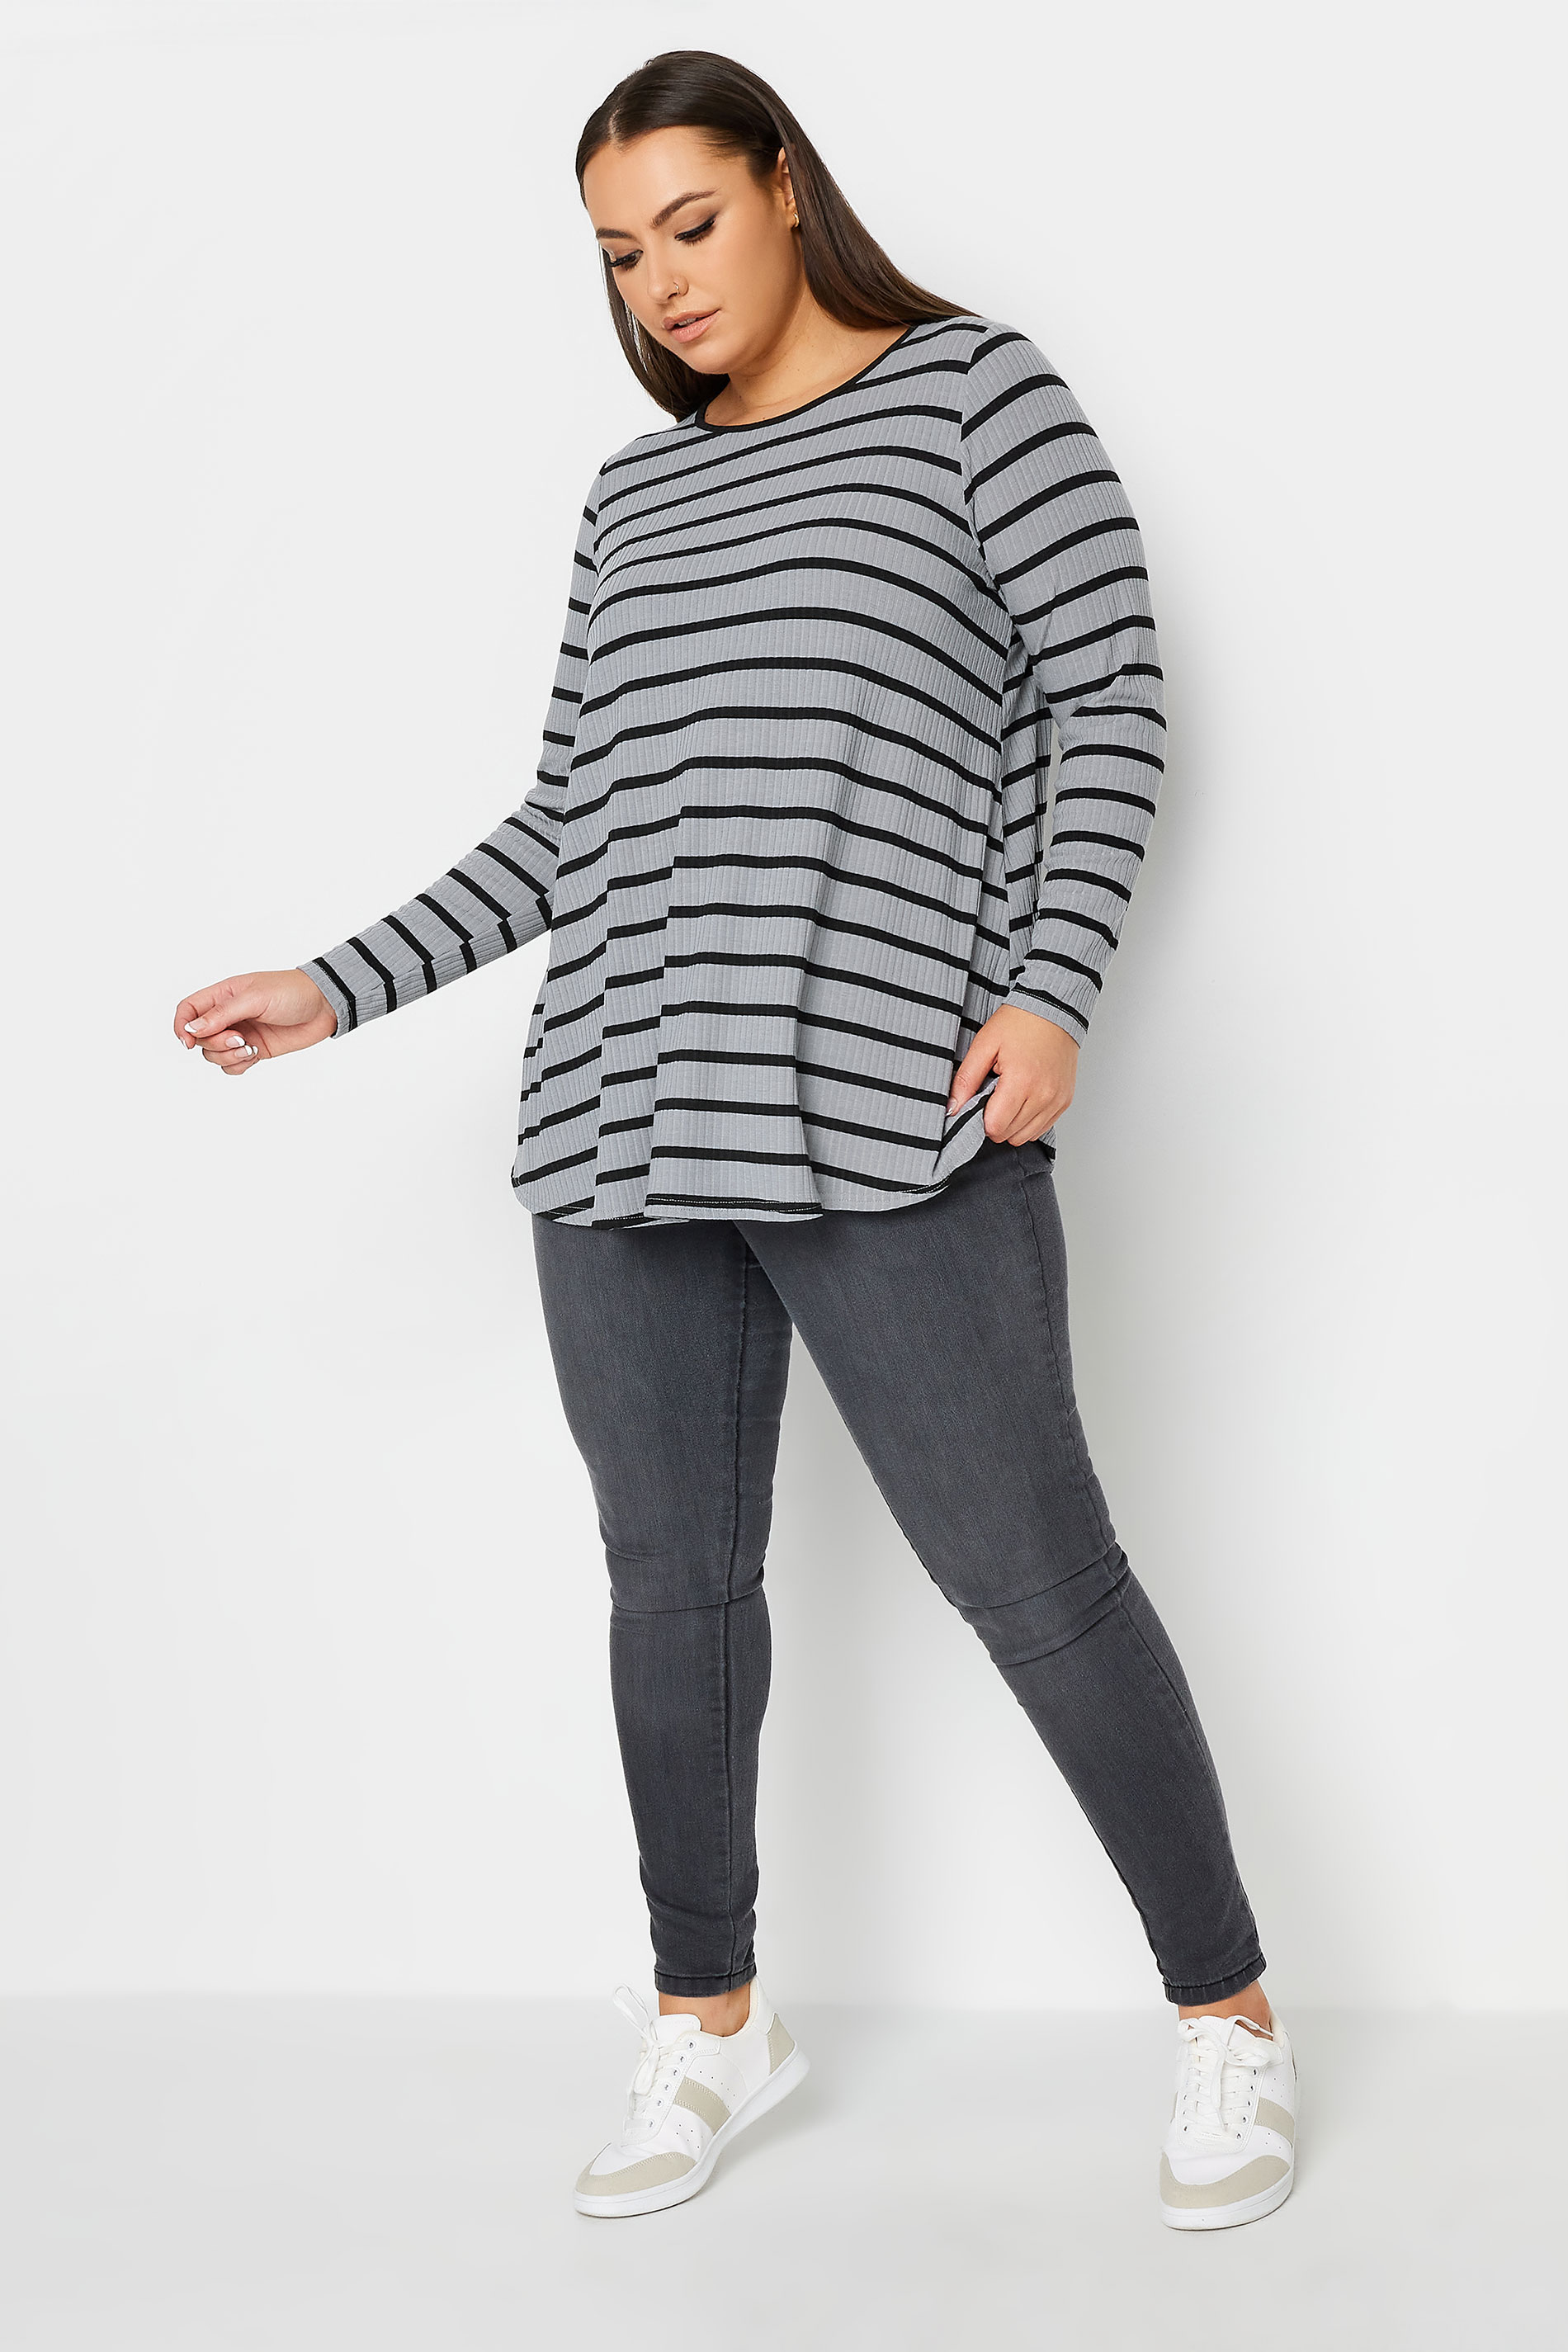 YOURS Plus Size Grey & Black Stripe Ribbed Swing T-Shirt | Yours Clothing 2